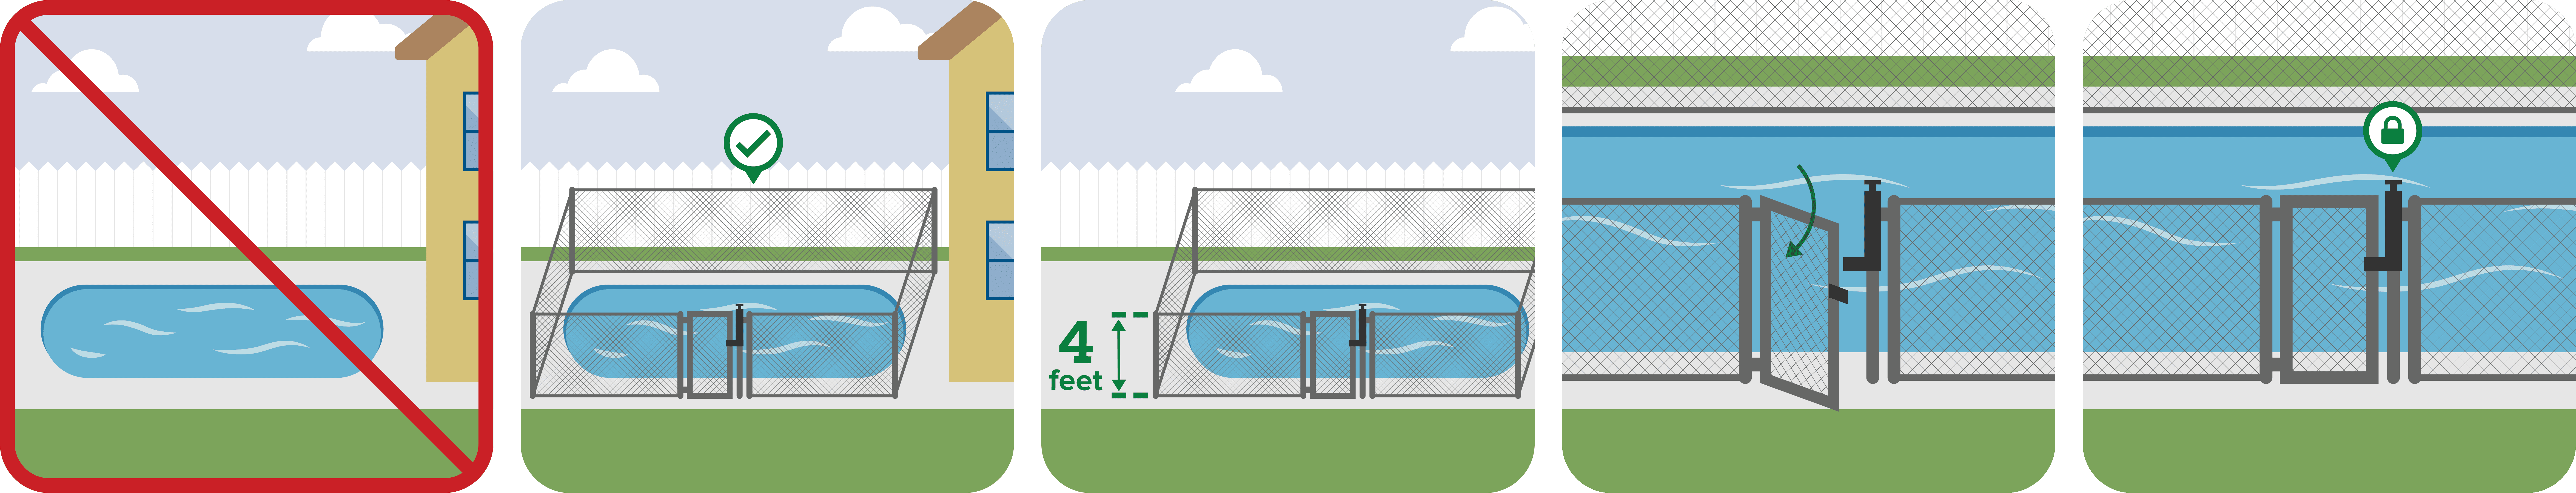 Pictograph depicting safety components of fences and gates.